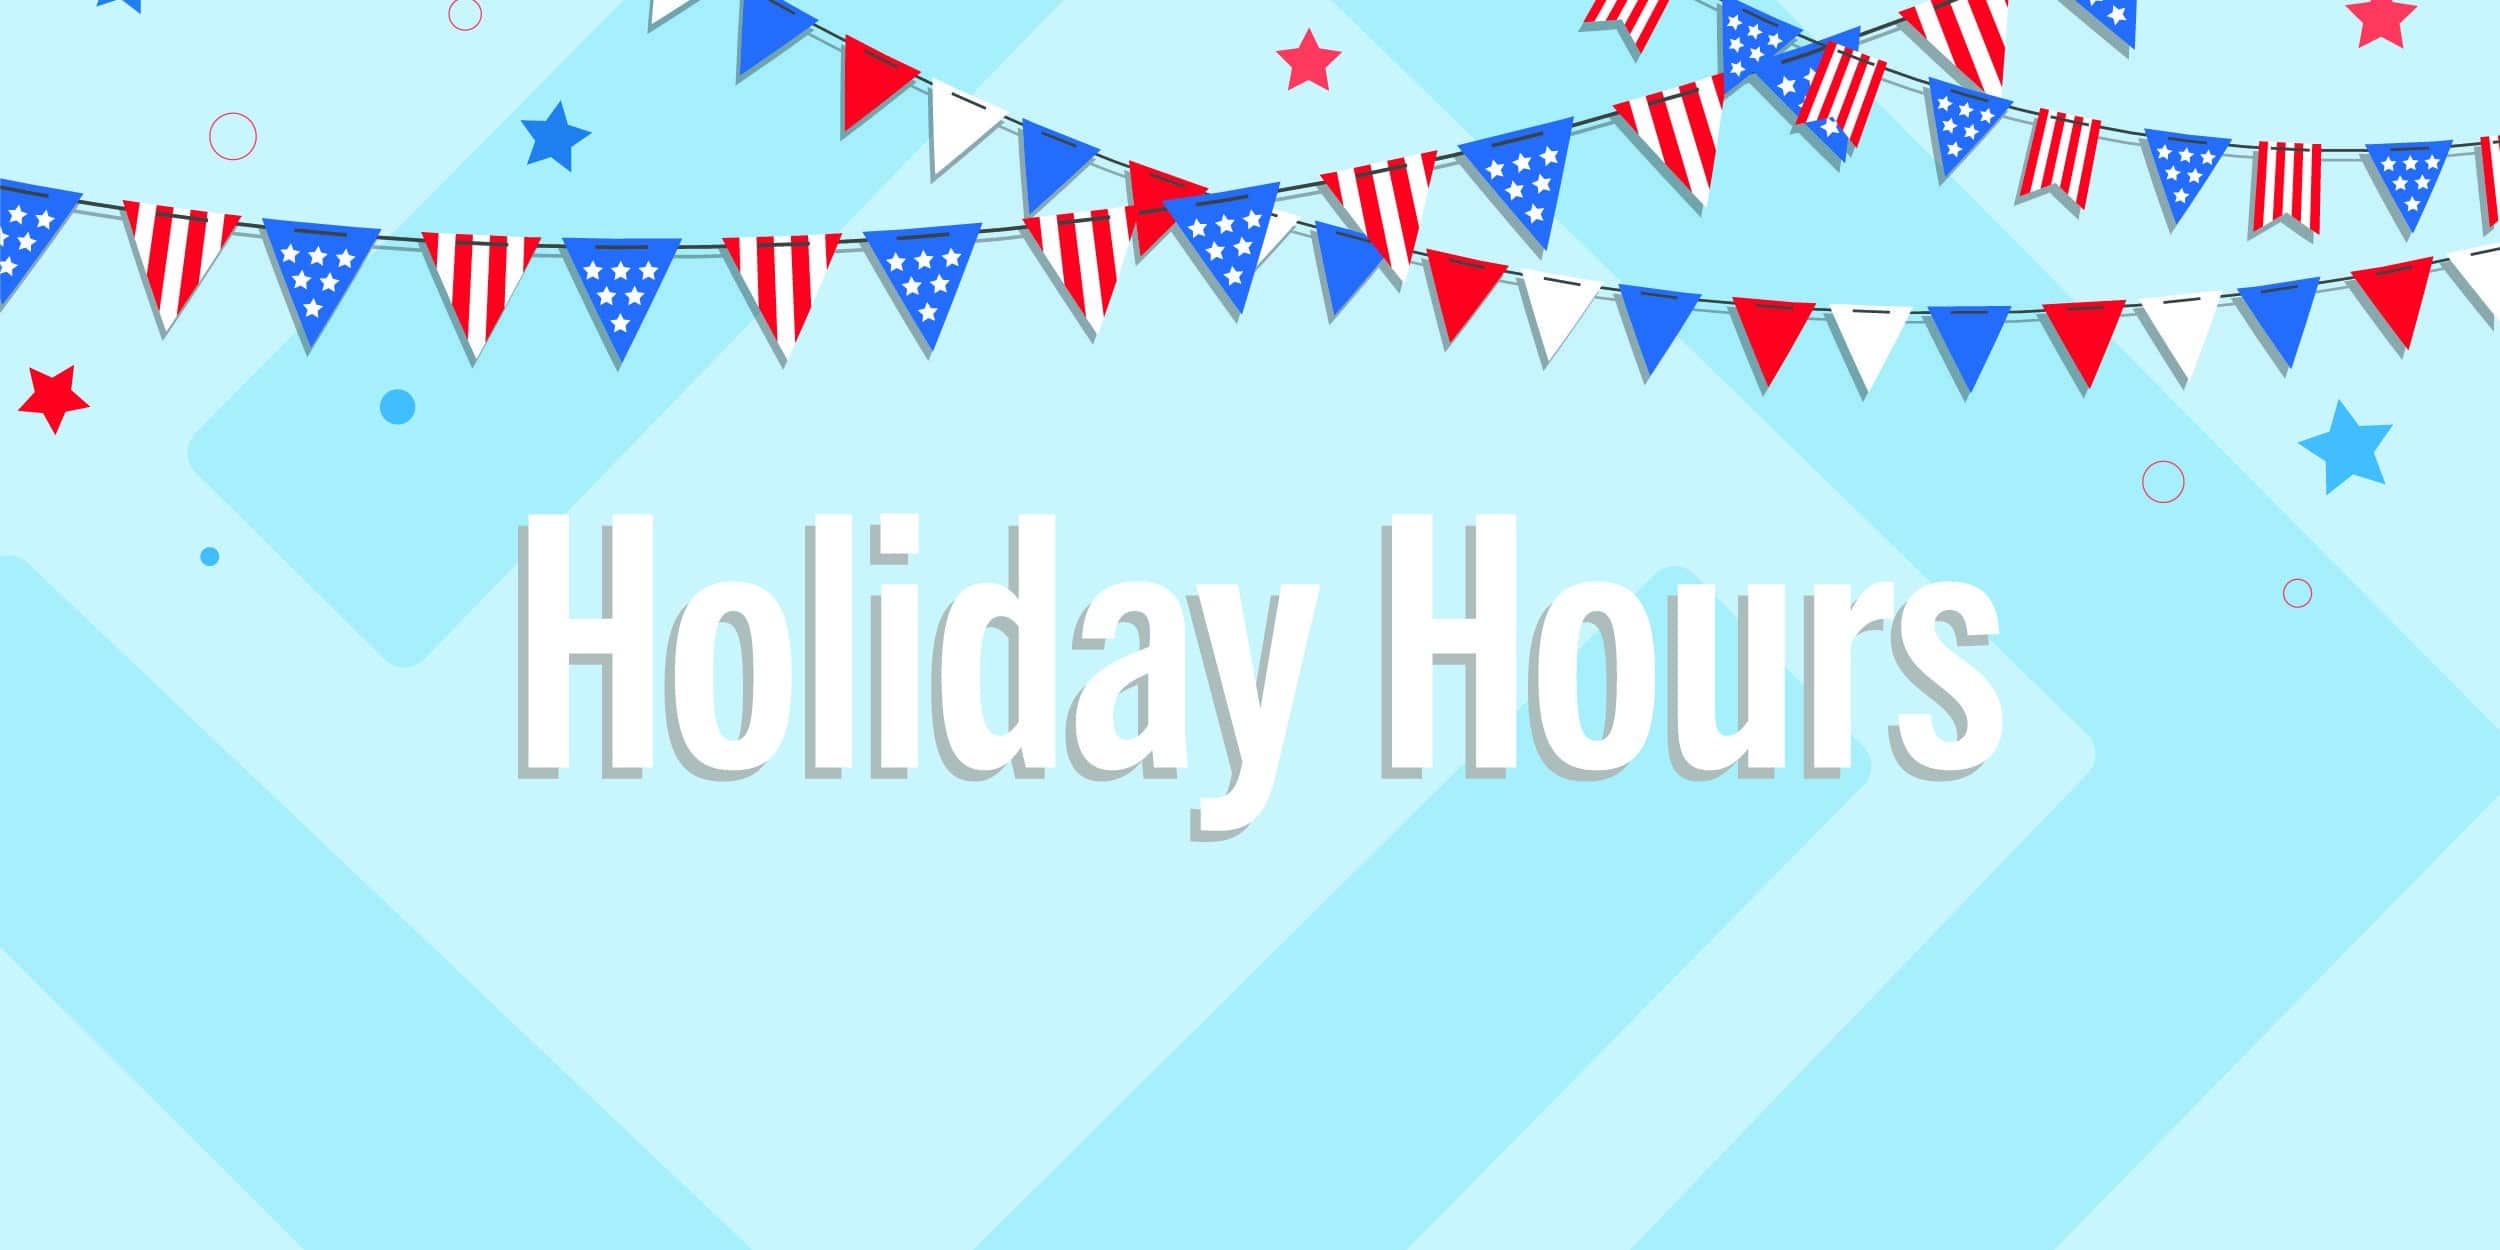 Click the image to learn more about Independence Day Holiday Hours